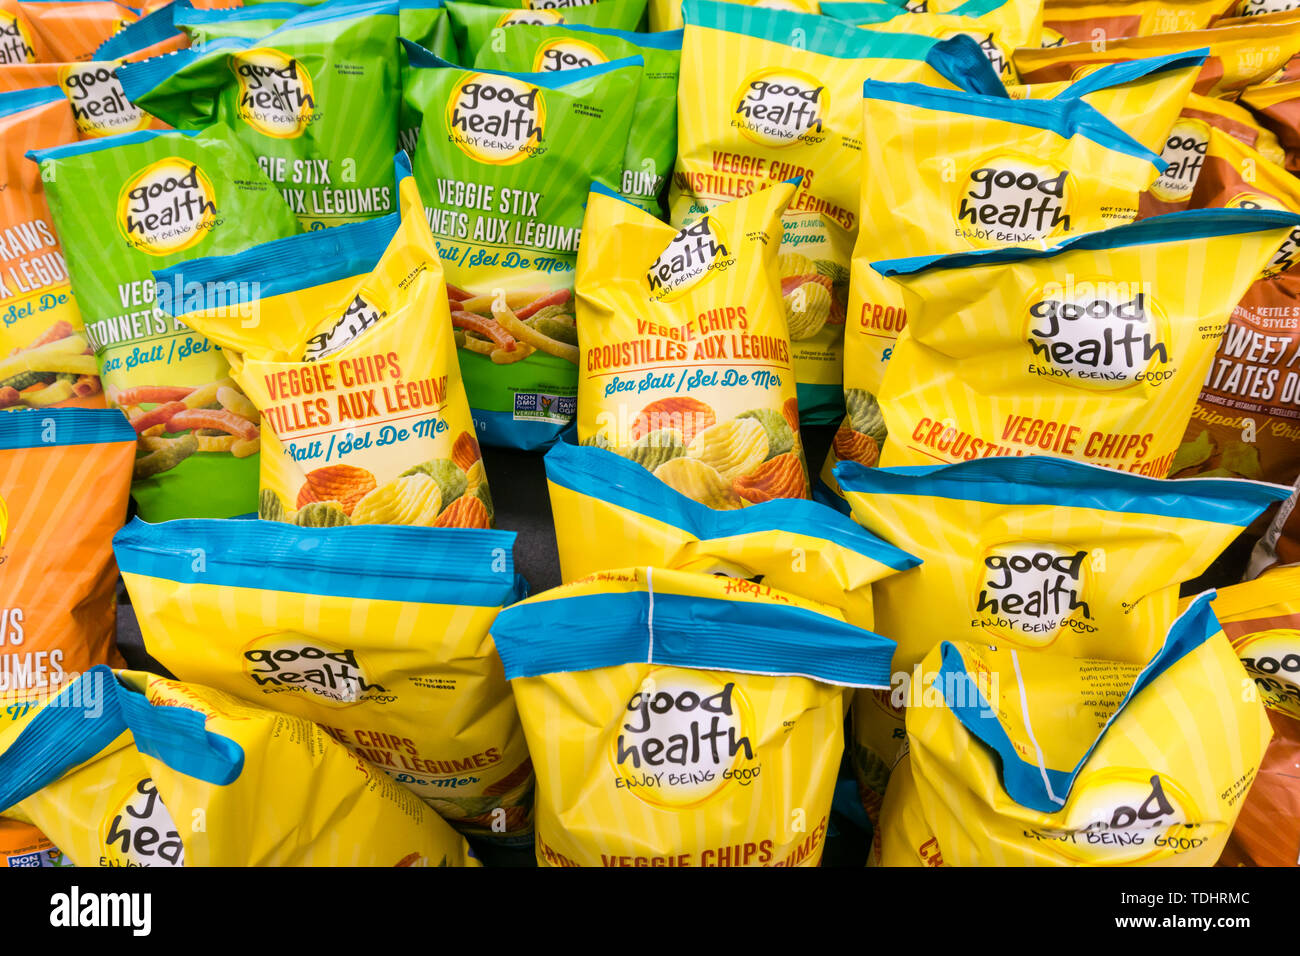 Packets of Good Health healthy potato crisps or potato chips for sale in a Canadian supermarket. Stock Photo